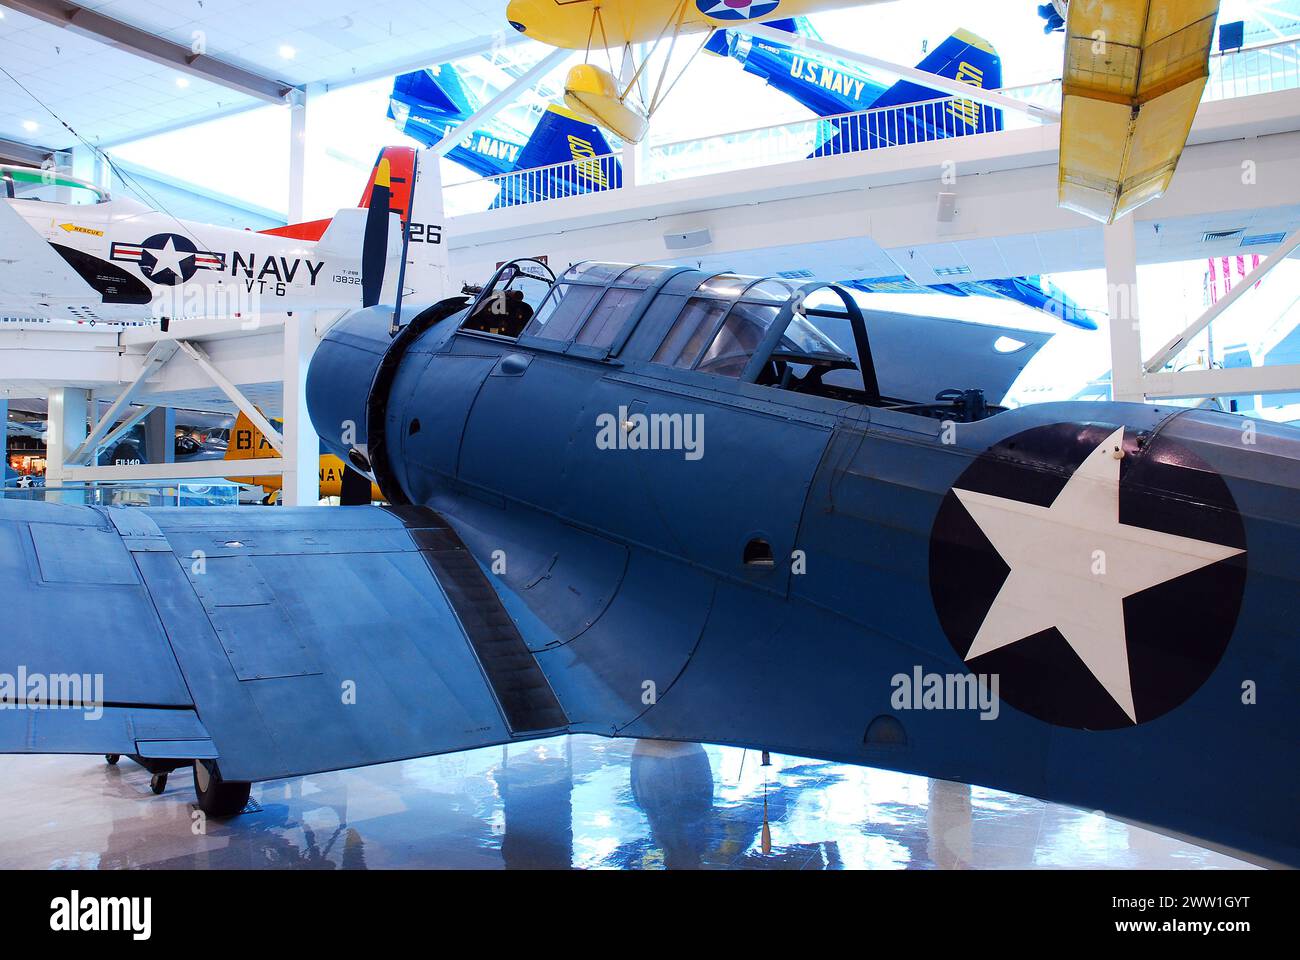 Historic American World War II Airplanes are on Display at the Naval Air Museum in Pensacola Florida Stock Photo